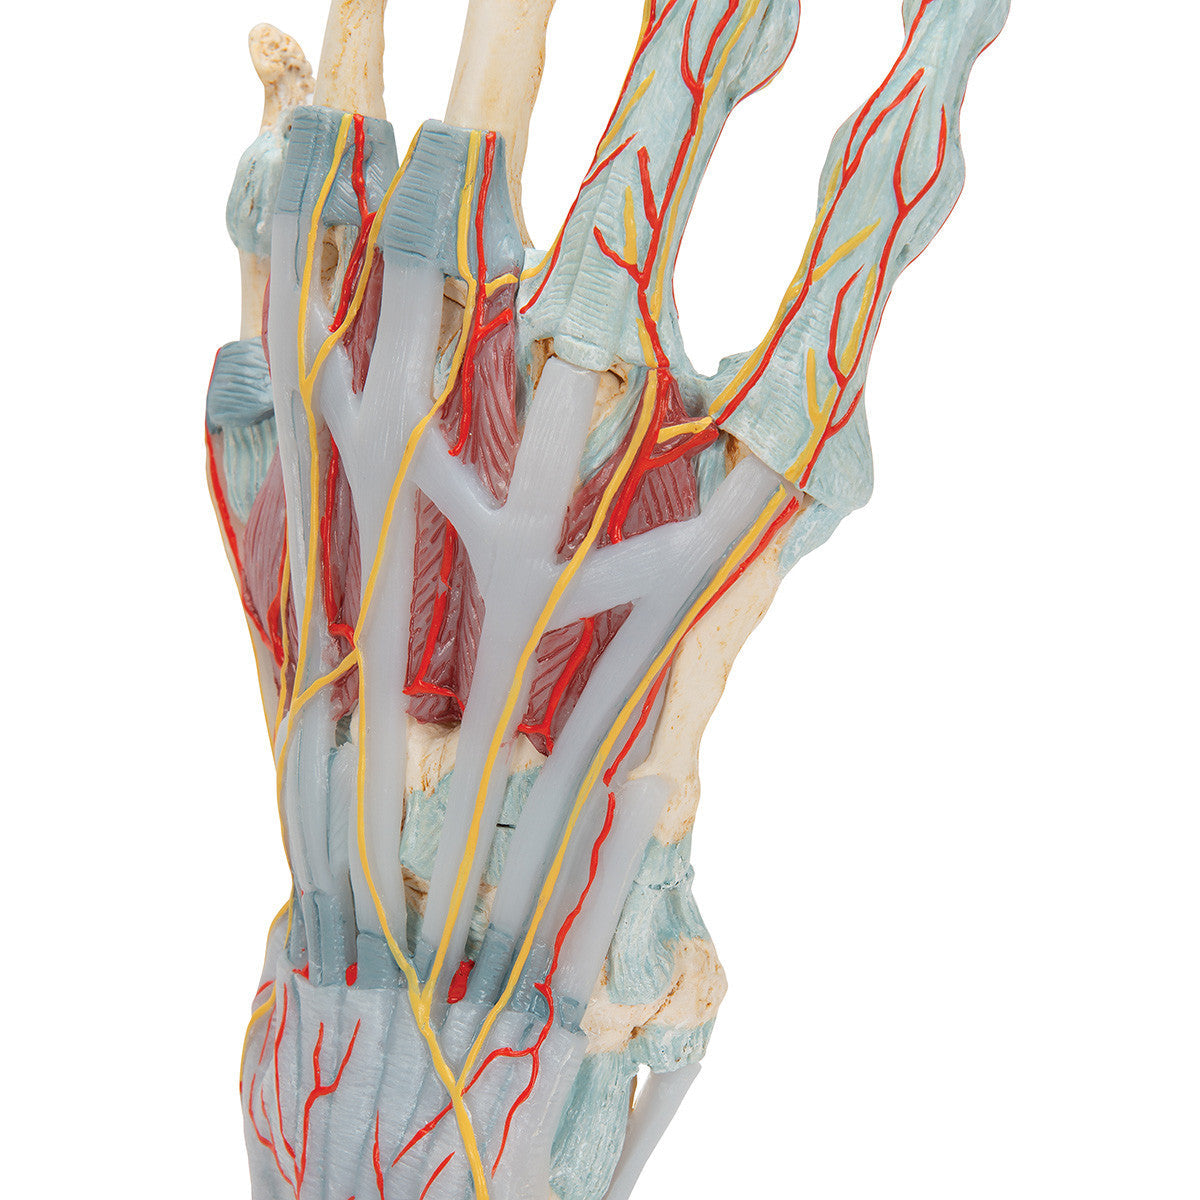 Hand Skeleton Model with Ligaments and Muscles - detail